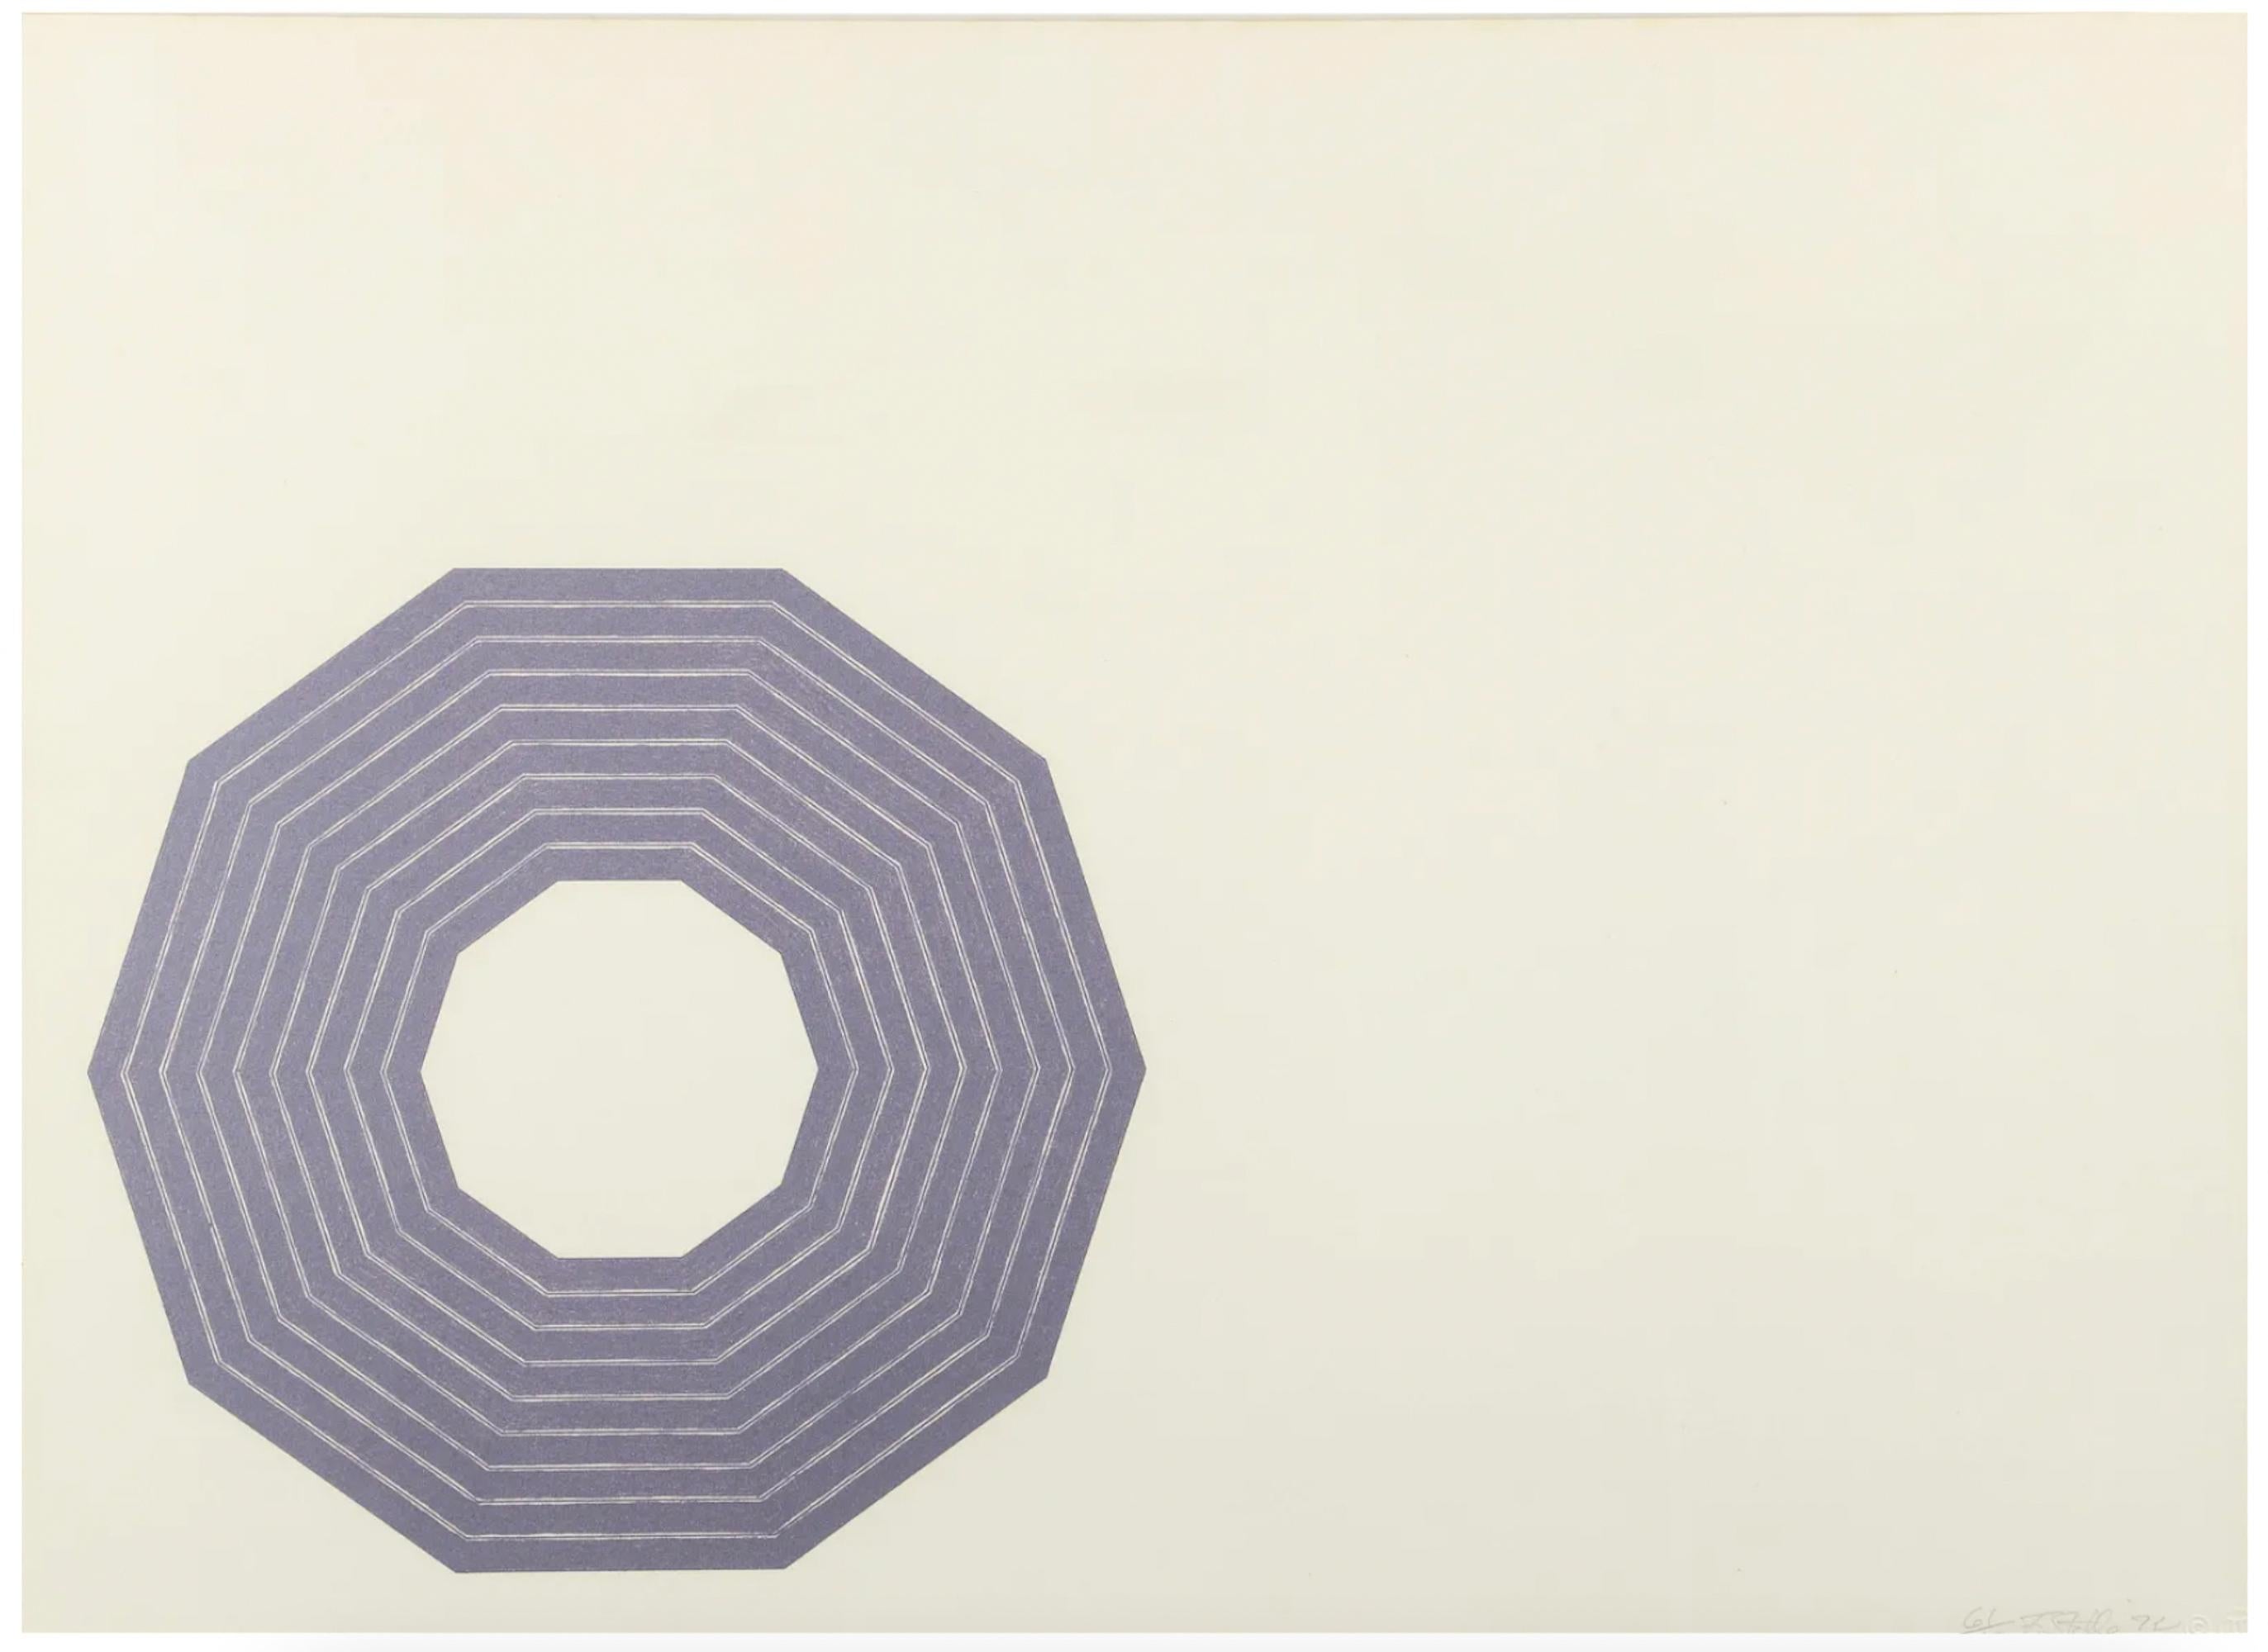 FRANK STELLA (1936-Present)

Frank Stella's 'D from Purple Series' is a 1972 lithograph on wove paper, signed, dated and numbered 61/100 lower right corner, published by Gemini G.E.L. with their chop lower right and also stamped on verso, full